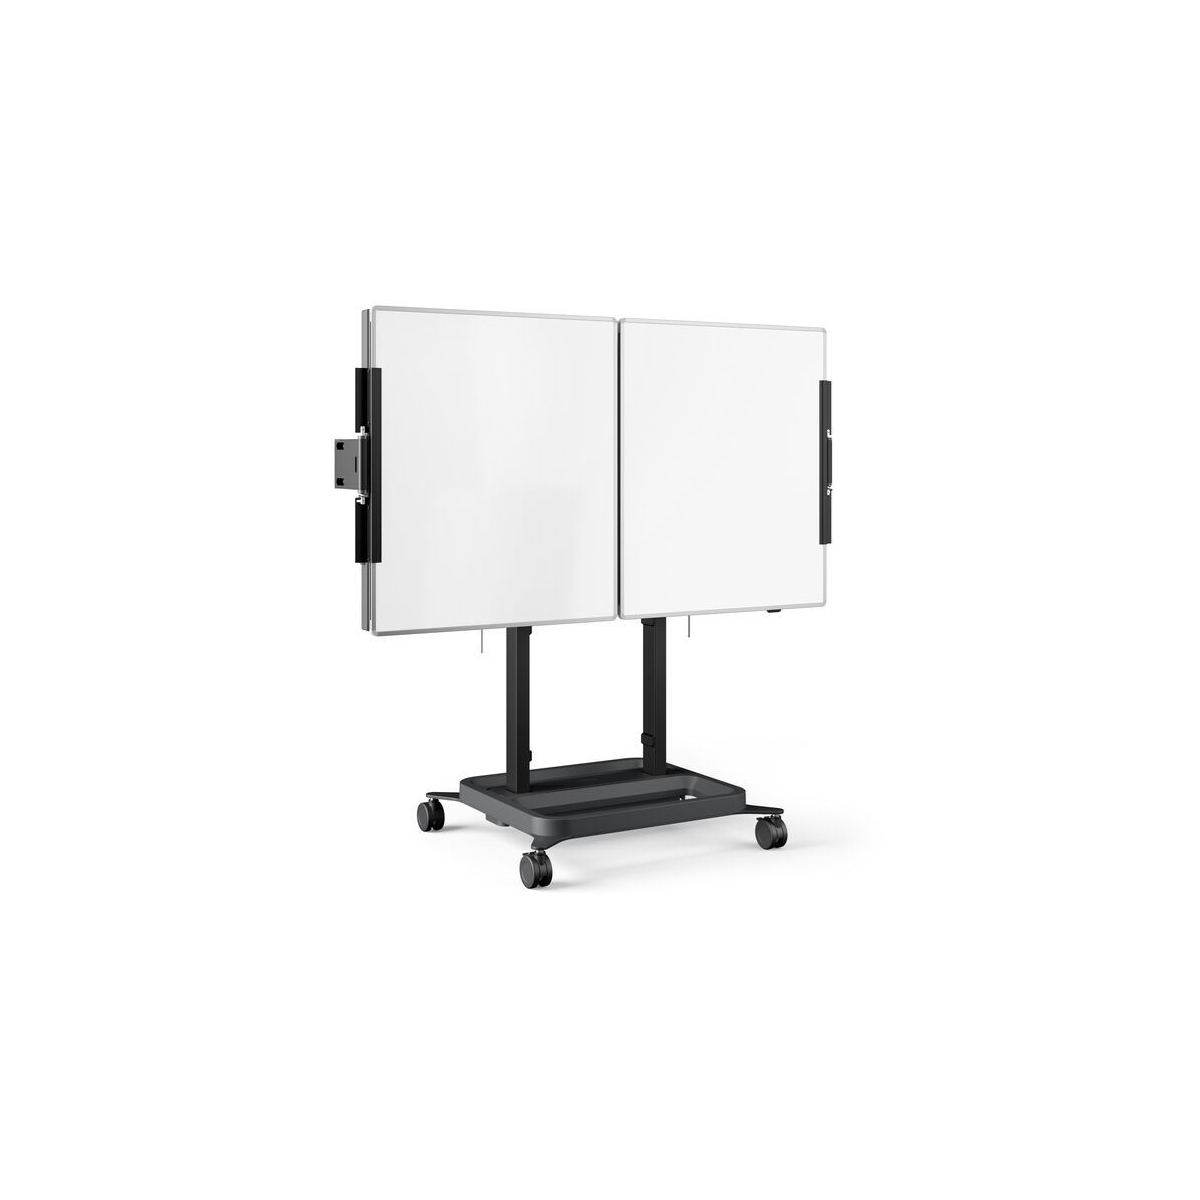 Vogels RISE A218 - 2x86" whiteboards set with adjustable hinges for a RISE floor-wall solution